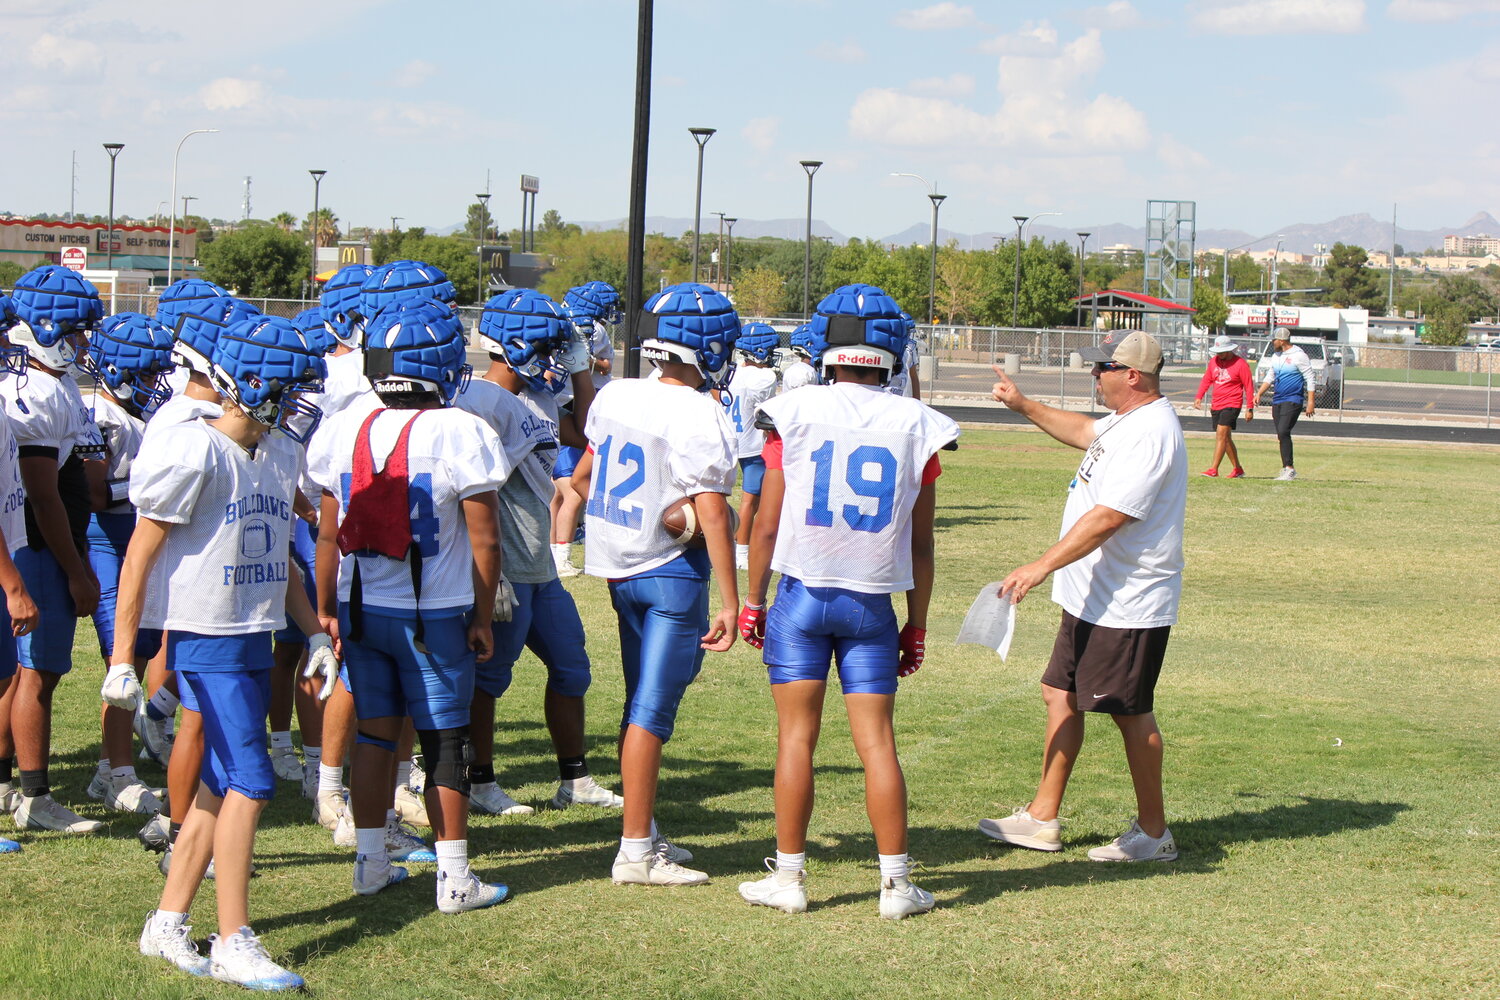 Organ Mountain High School practiced Monday, Aug. 14, under the shadows of the Organ Mountains. The Knights’ new coach, Kenny Sanchez came in from Las Vegas, Nevada, where he coached Bishop Gorman High School for 11 years, including 2016, when he was named National Coach of the Year by MaxPreps. The Knights were 3-7 last season.